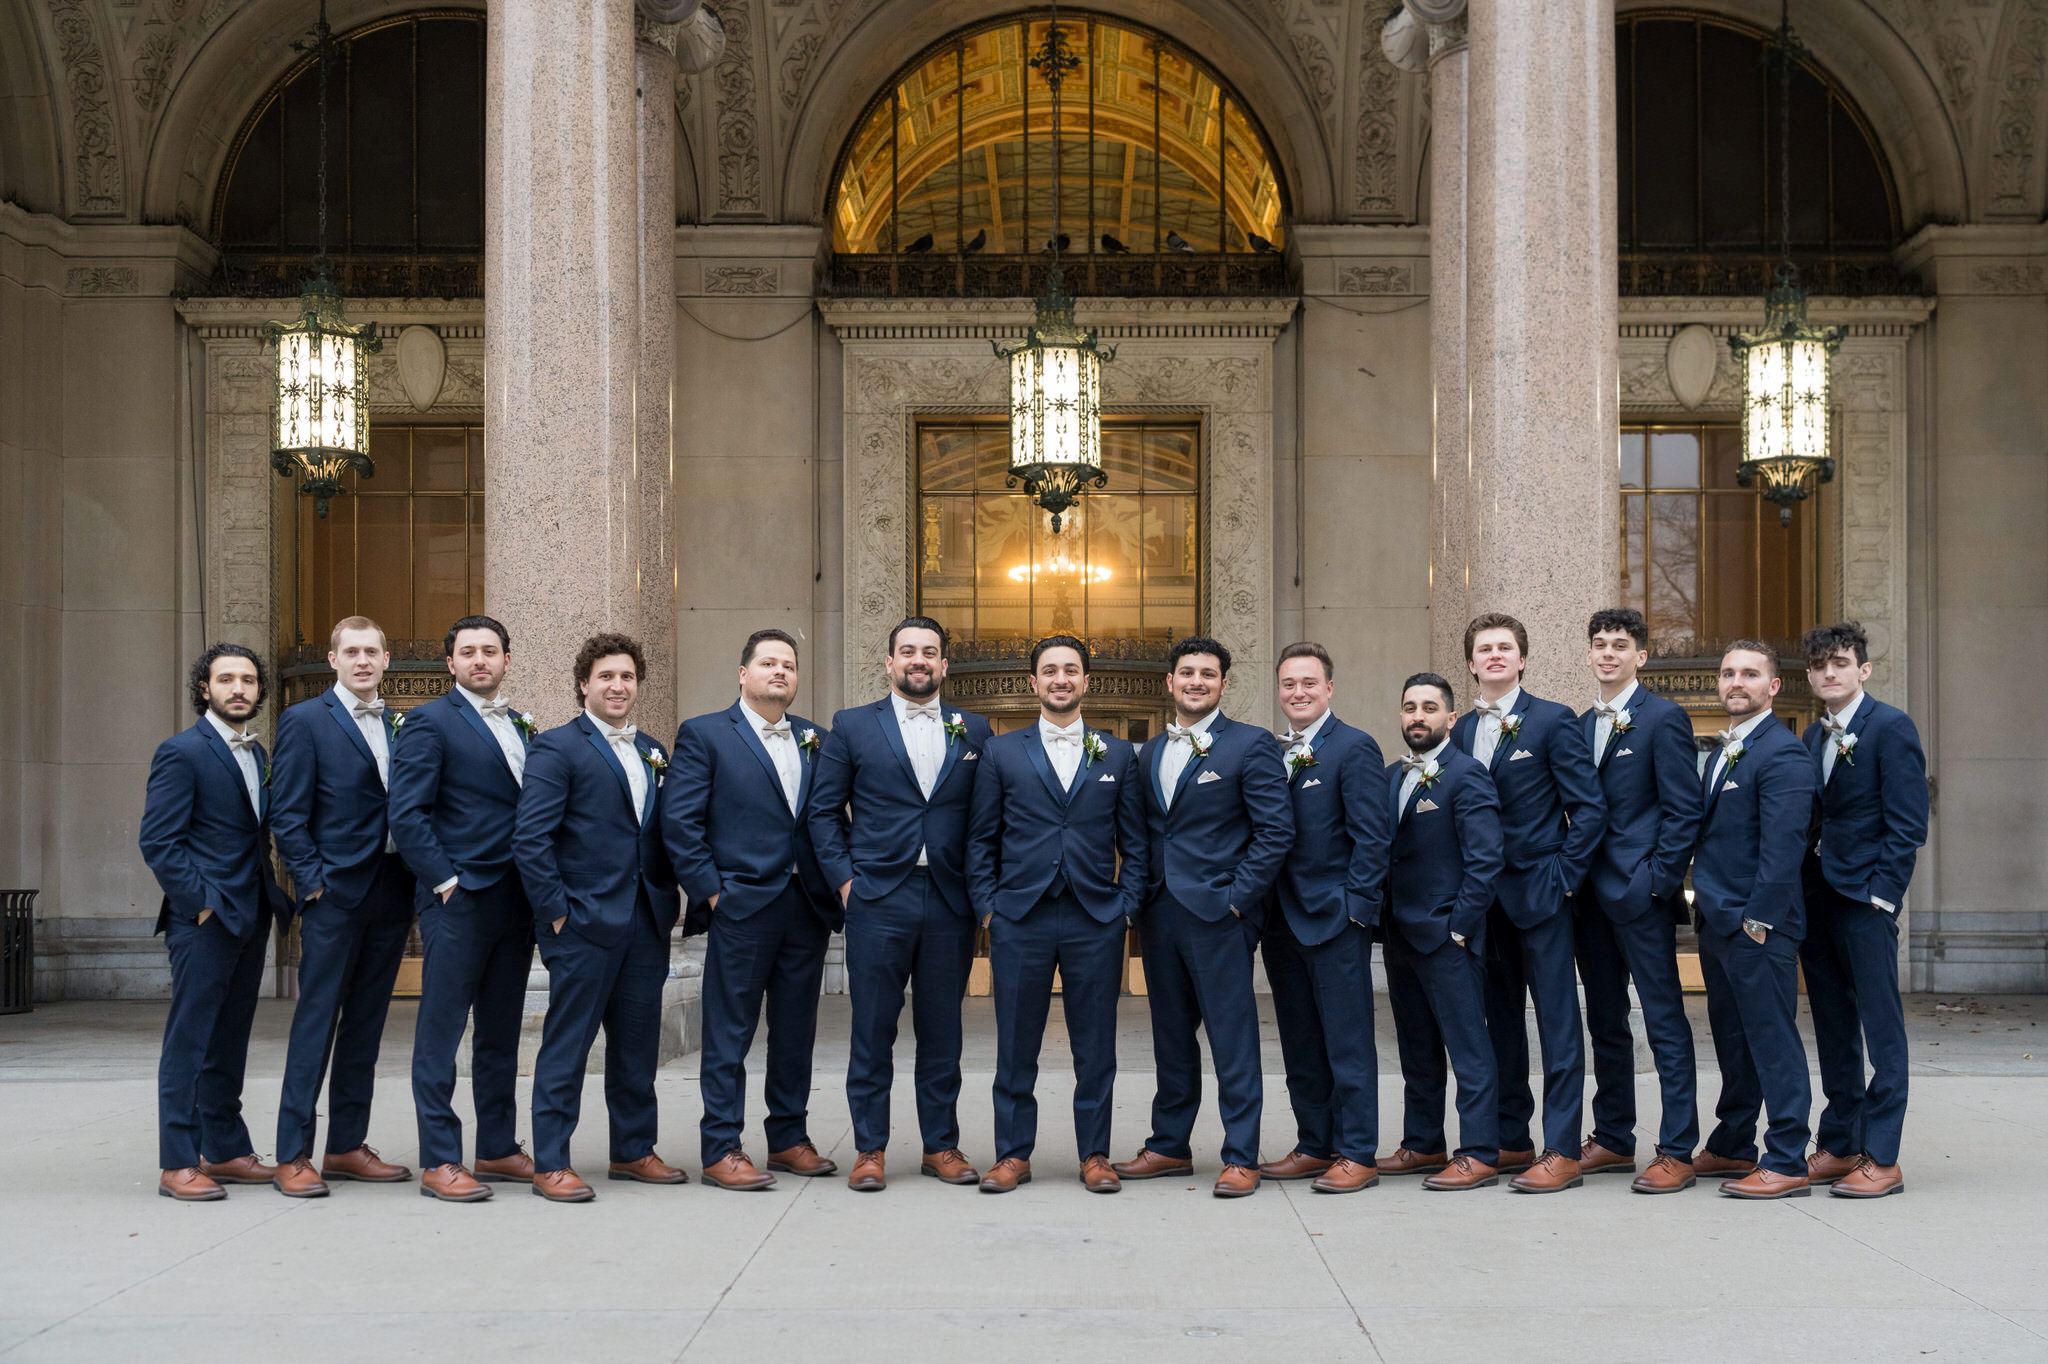 Groomsmen pose together at Cadillac Place